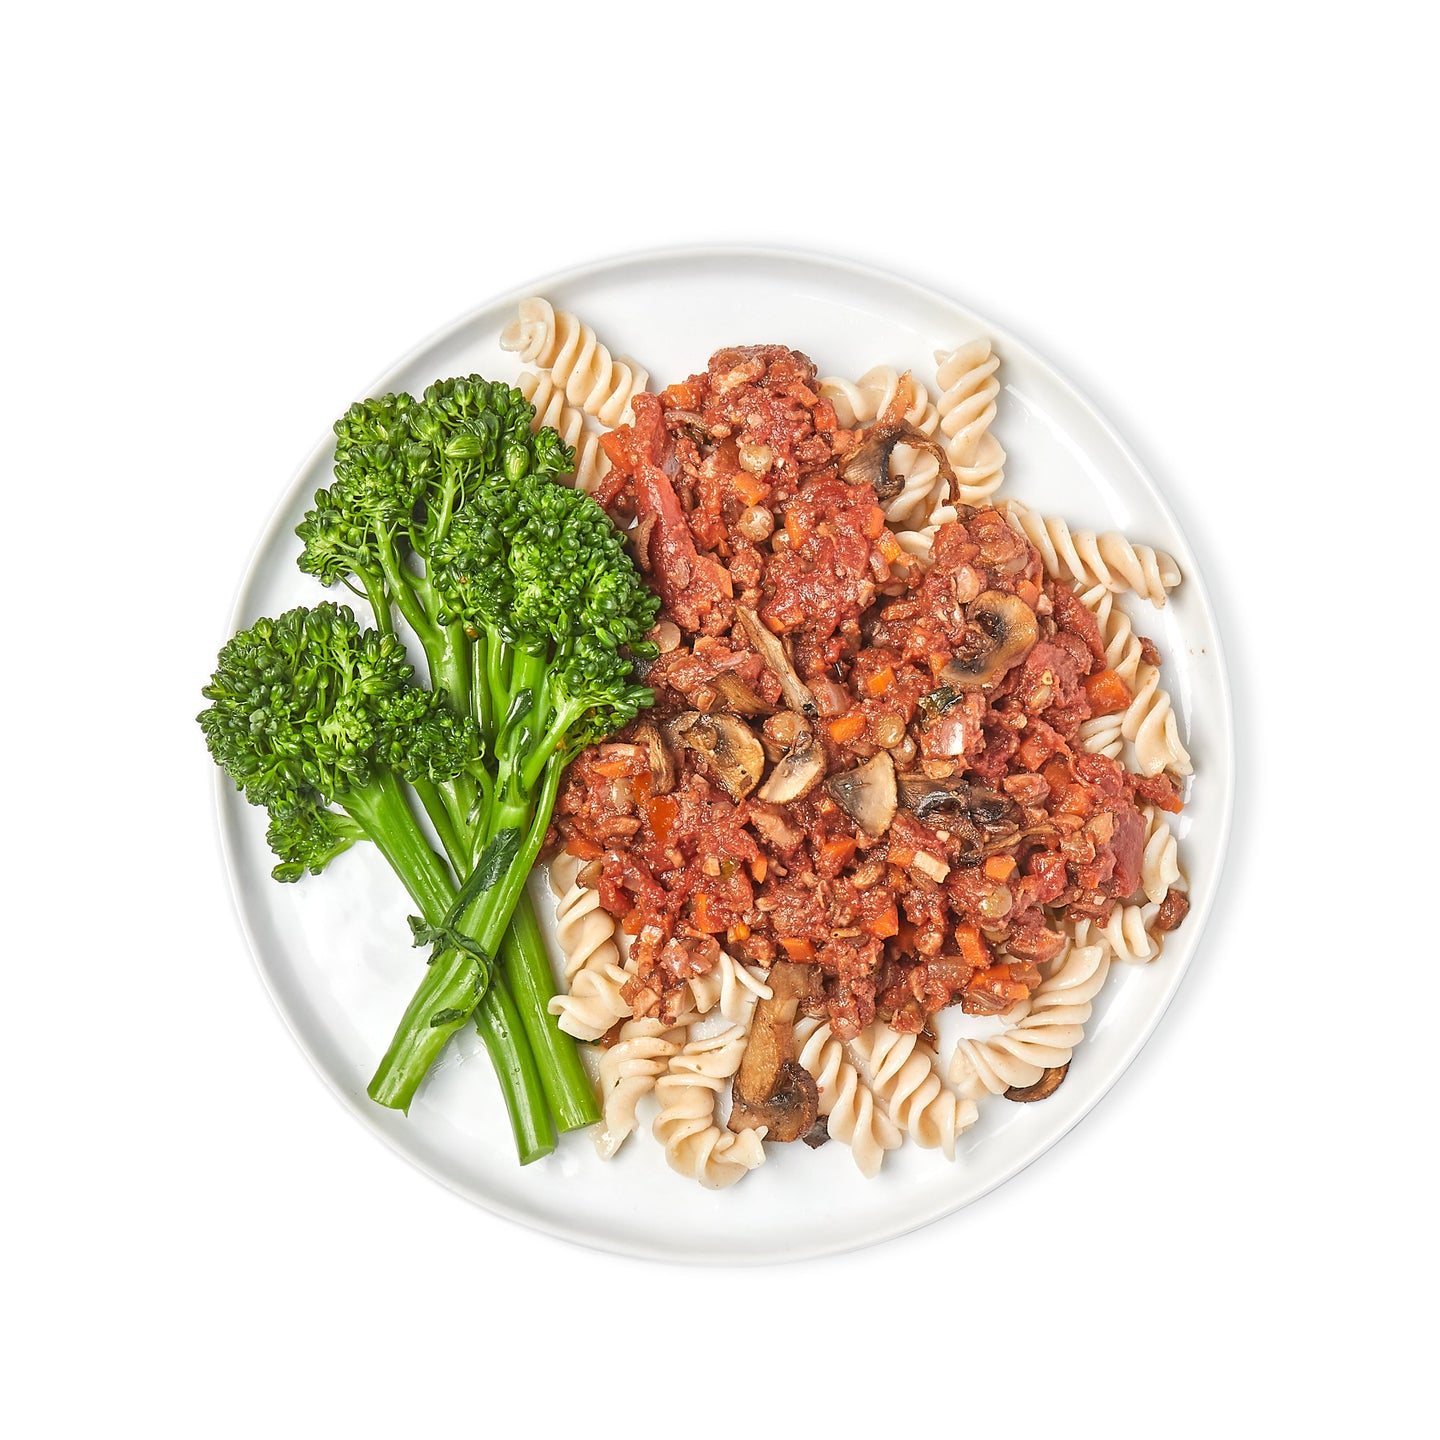 mushroom, lentil, and walnut bolognese azuluna foods Premium Pasture-Raised ready-to-eat Meals Delivery